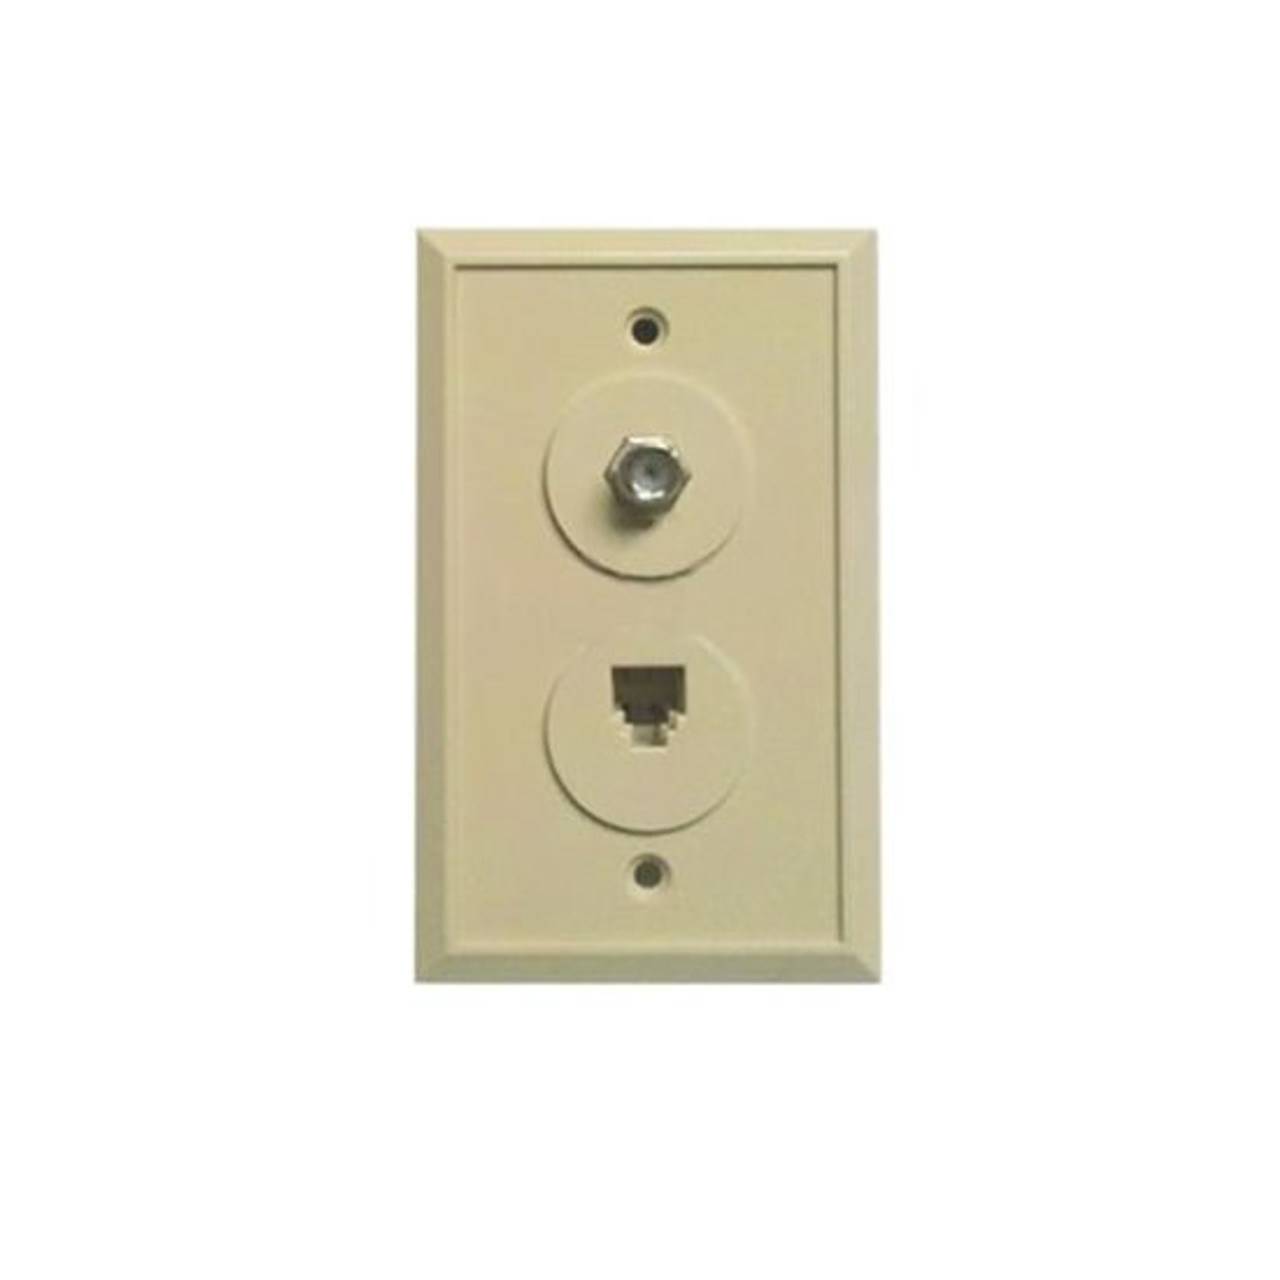 Eagle Phone Wall Plate F Type Jack Ivory RJ11 Coaxial Combo F-81 Textured F Coax Wall Plate RJ-11 Modular Data Line Audio Signal Video 75 Ohm Coaxial Cable Plug, 2 Device Outlet Cover, Part # Woods 0968I